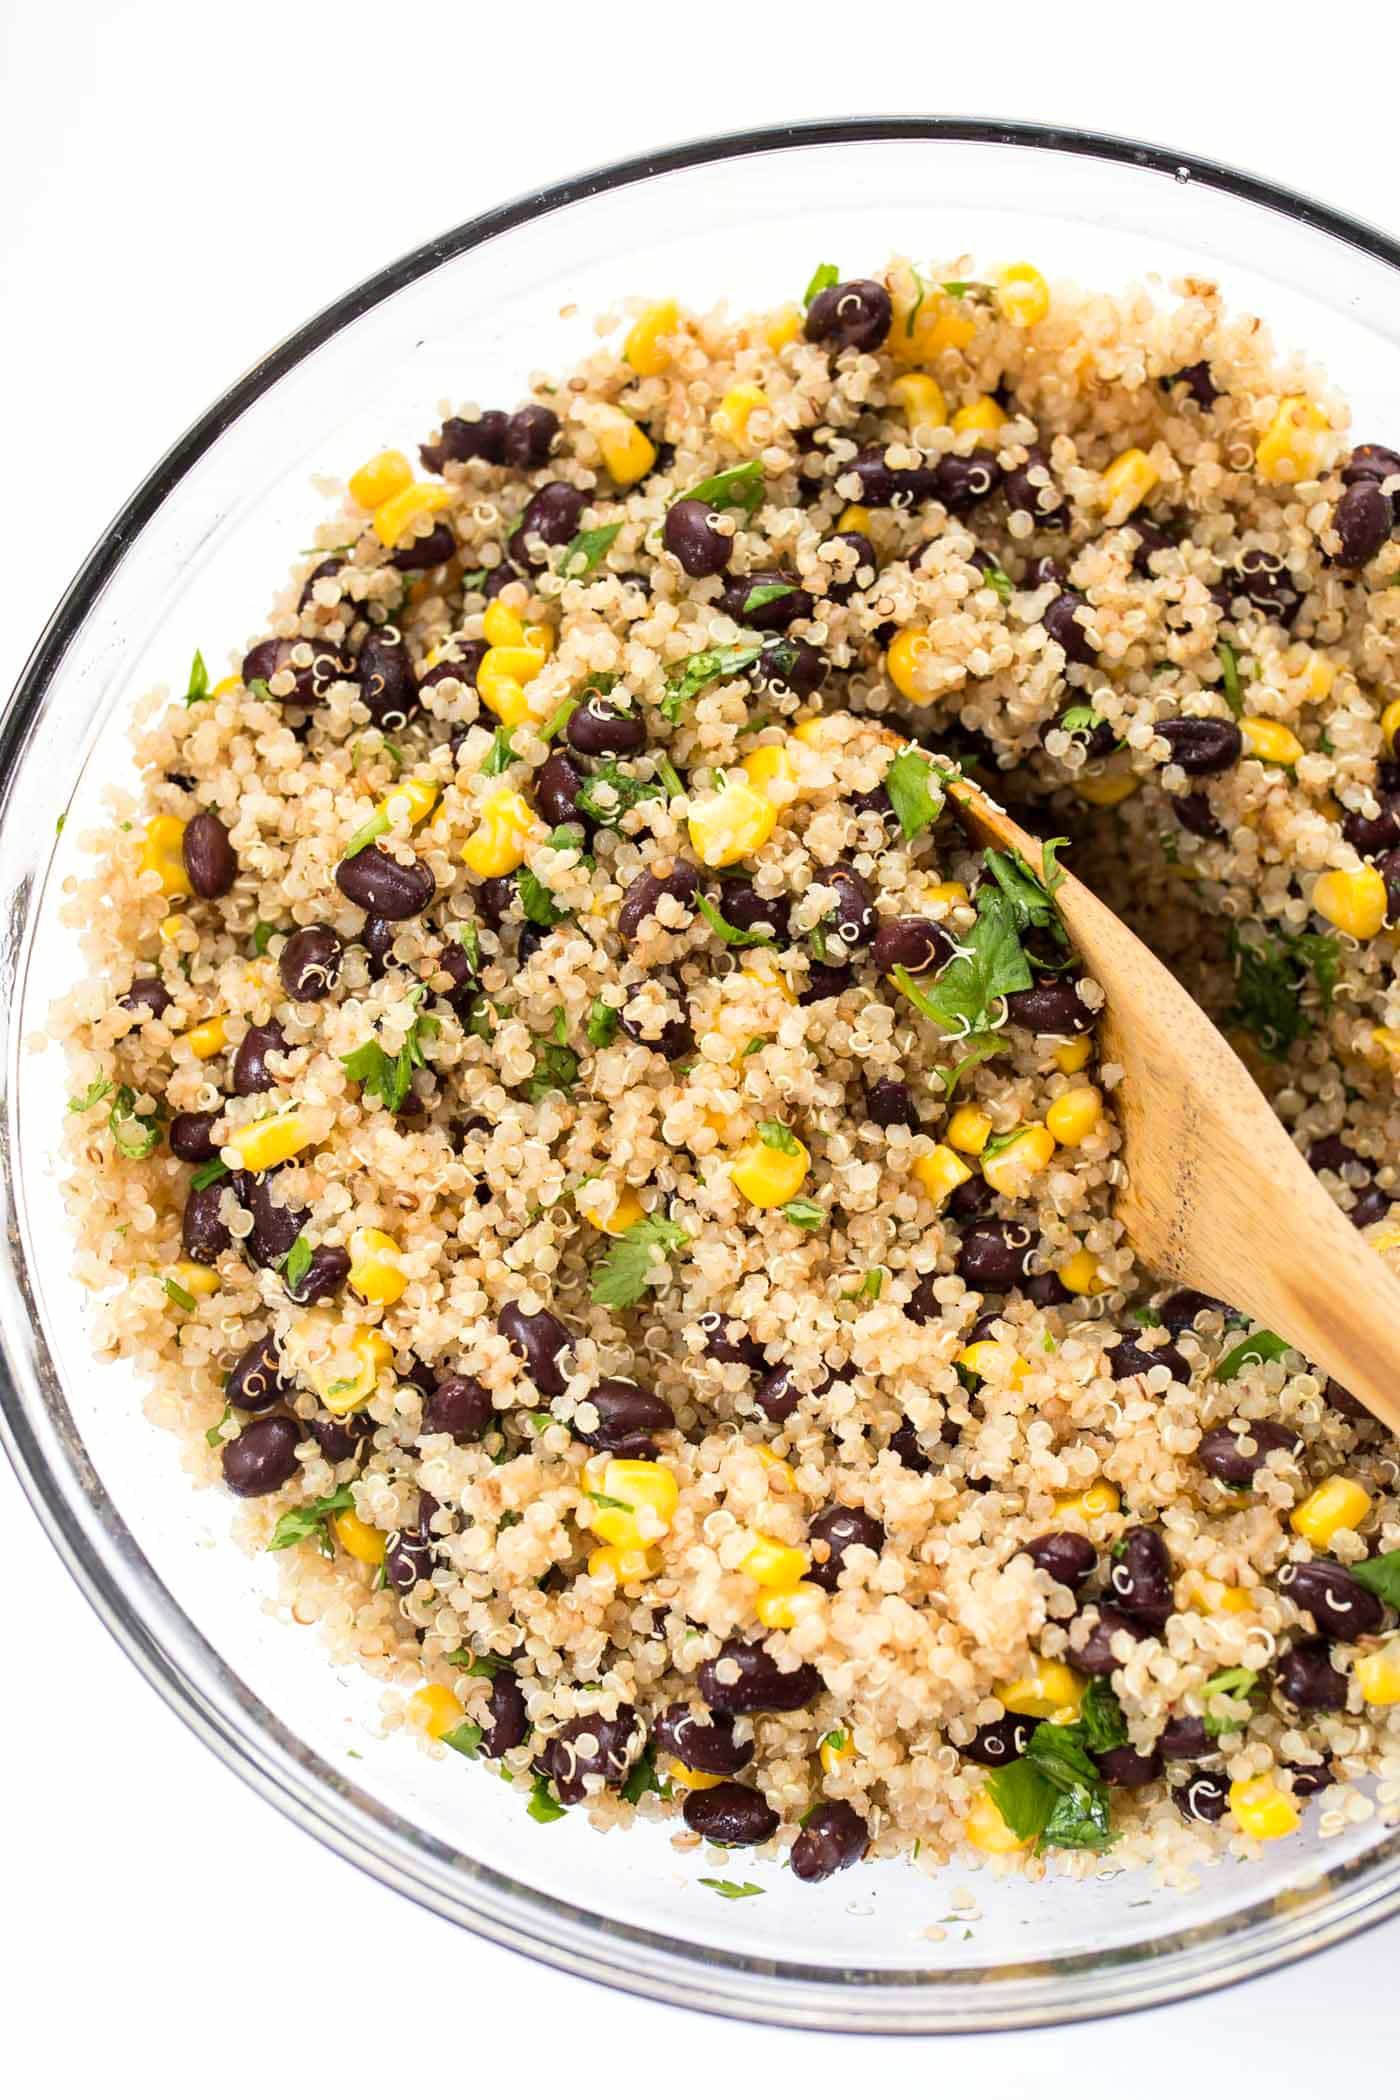 This Vegetarian Quinoa Burrito Bowl is PERFECT for meal prep and ready in under 20 minutes!